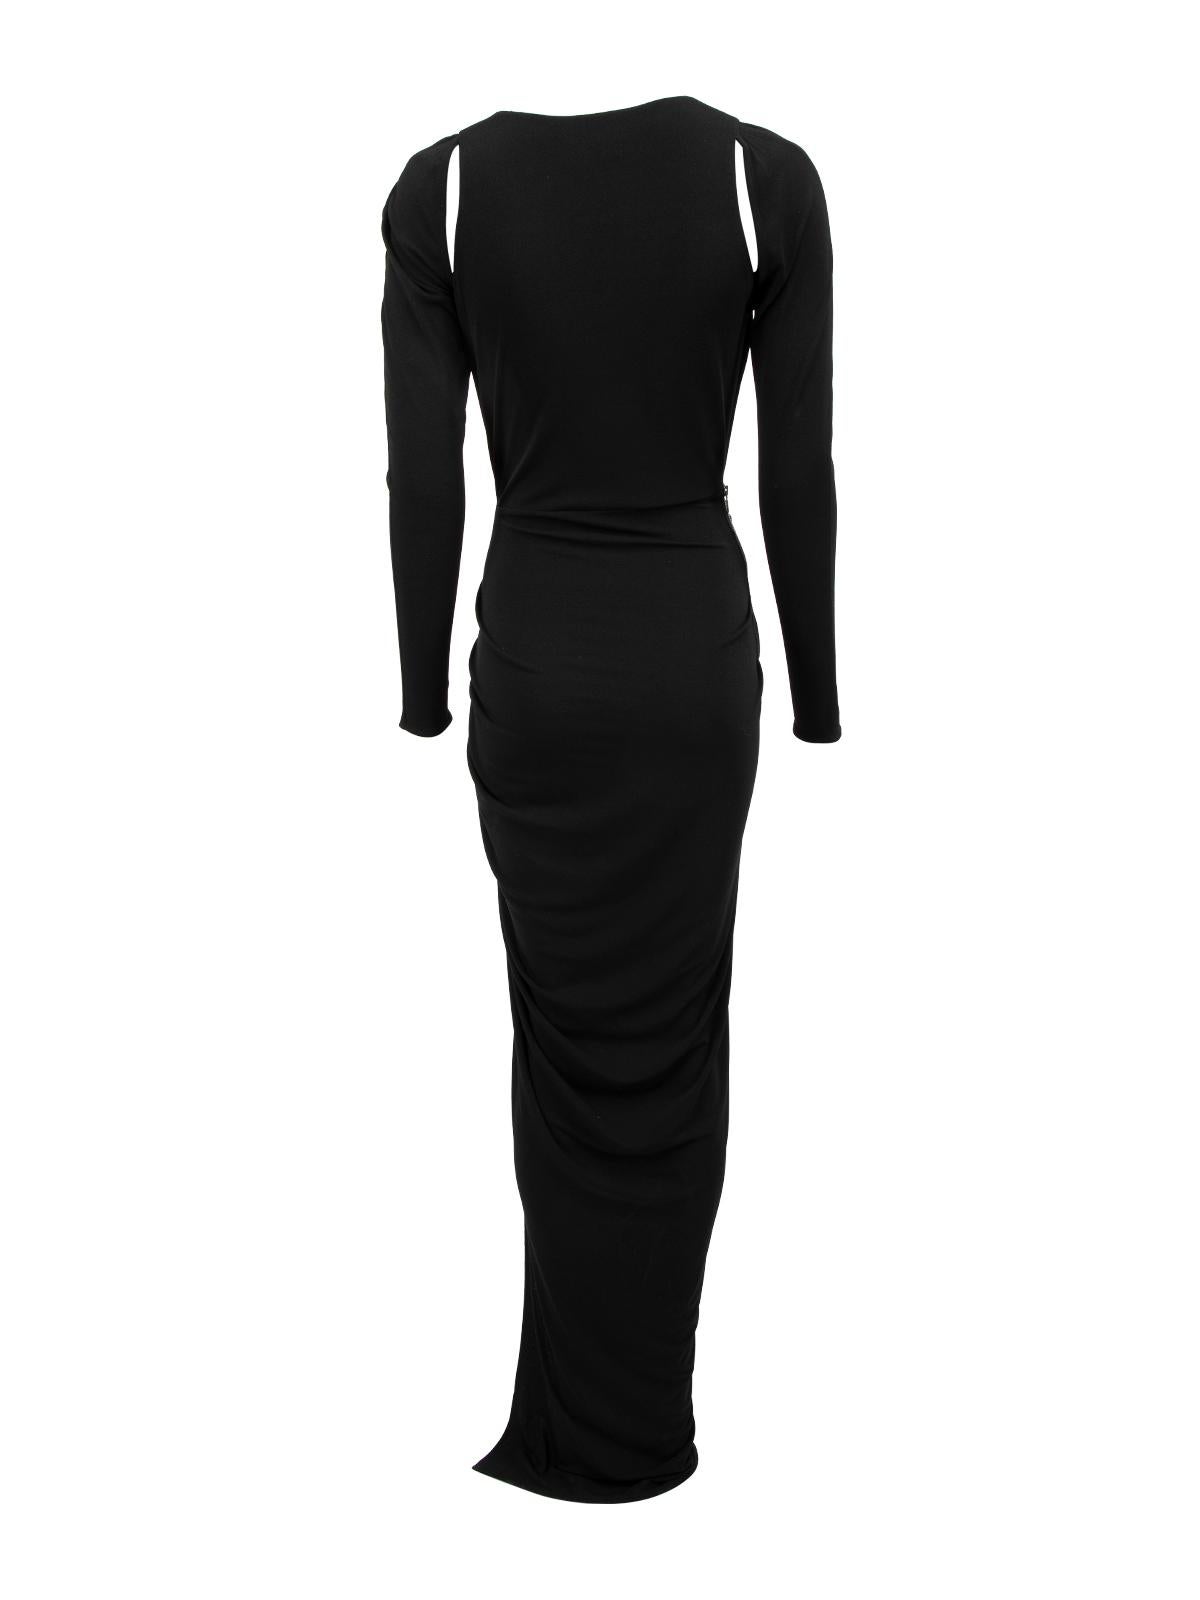 Pre-Loved Philipp Plein Women's Black Cold Shoulder Deep V Ruched Gown In Excellent Condition For Sale In London, GB